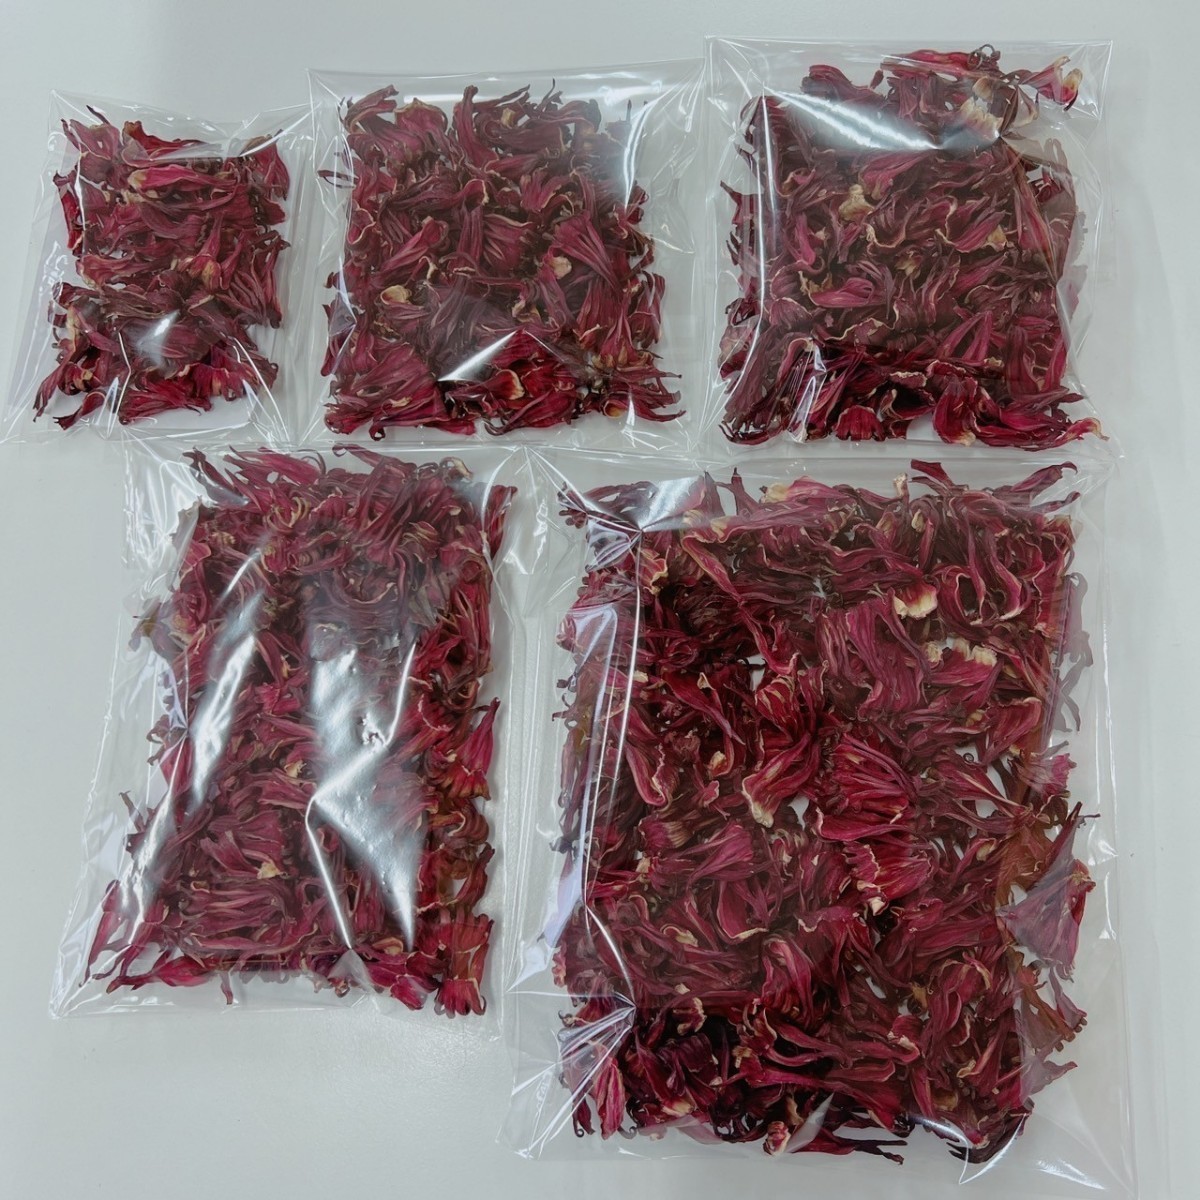  fruits 50g hibiscus low zeru dry Okinawa prefecture production hot also chilling chilling also!